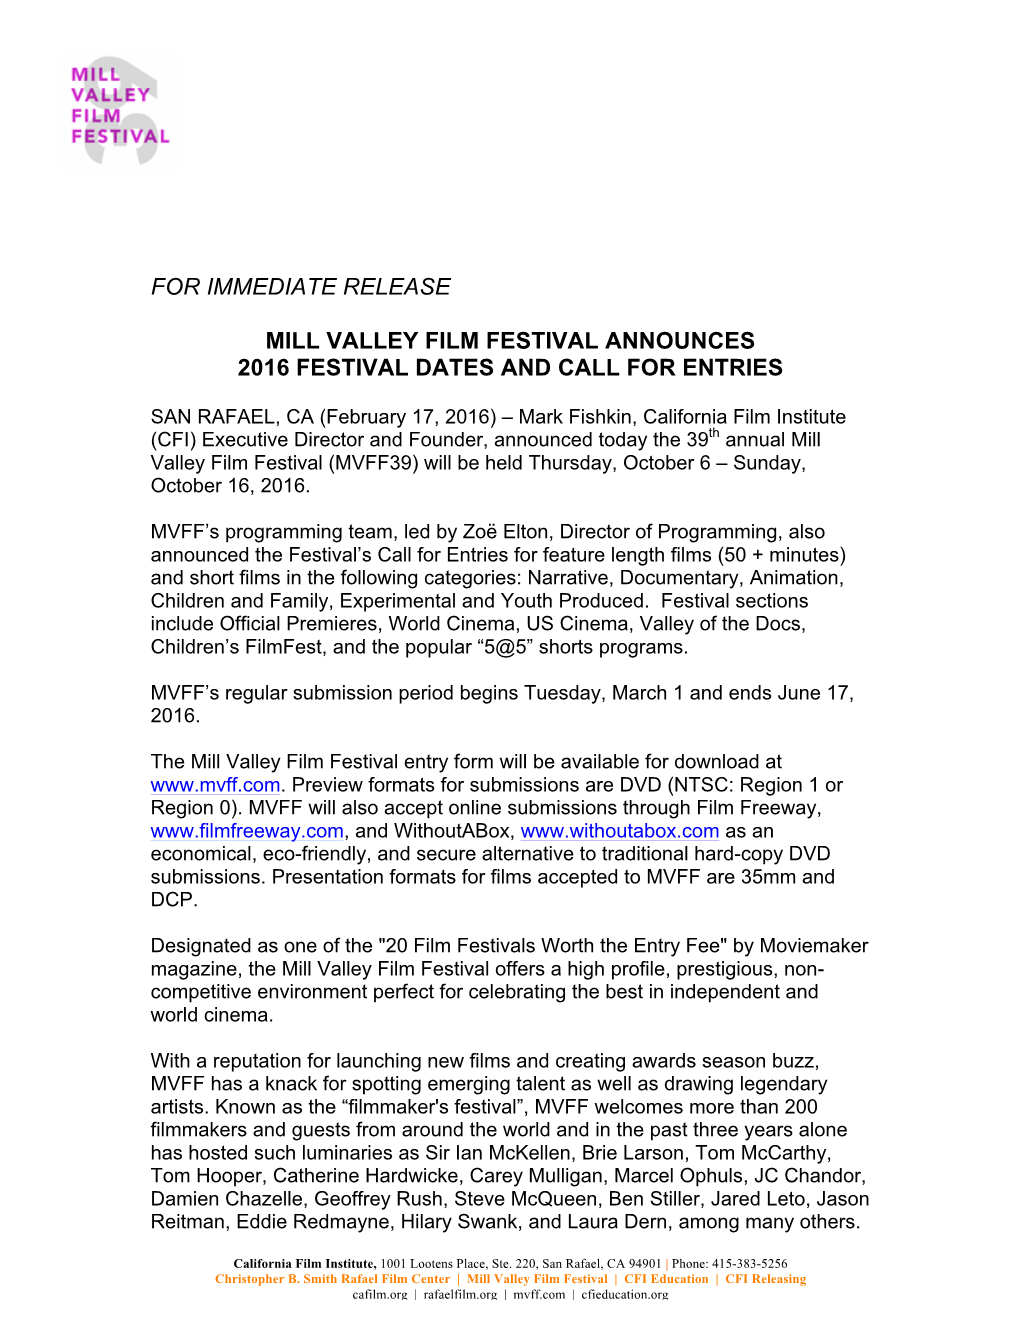 MVFF39 Call for Entries